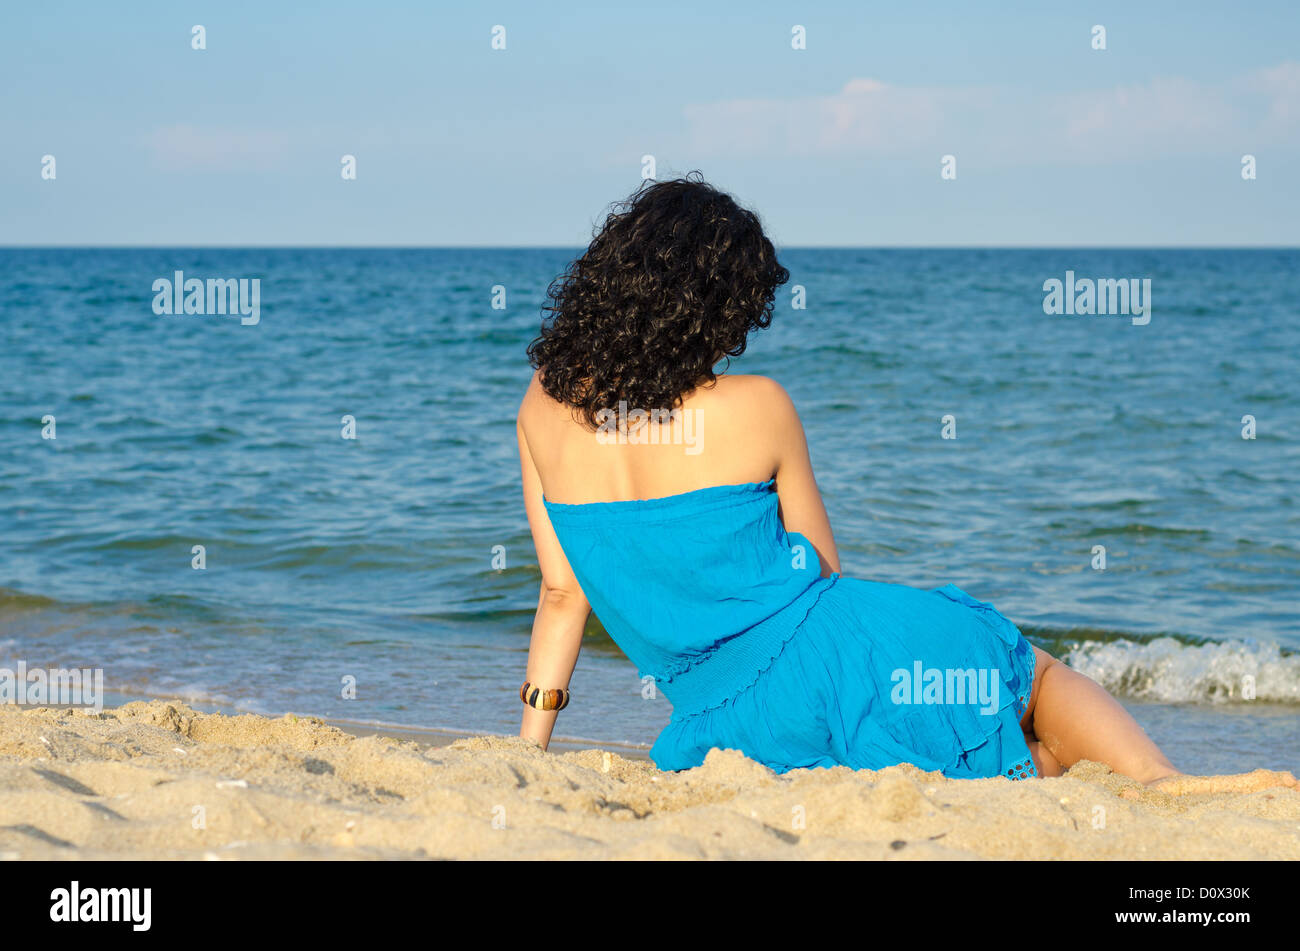 Woman with beautiful curly brunette hair sitting on a sandy beach with her back to the camera admiring the ocean Stock Photo